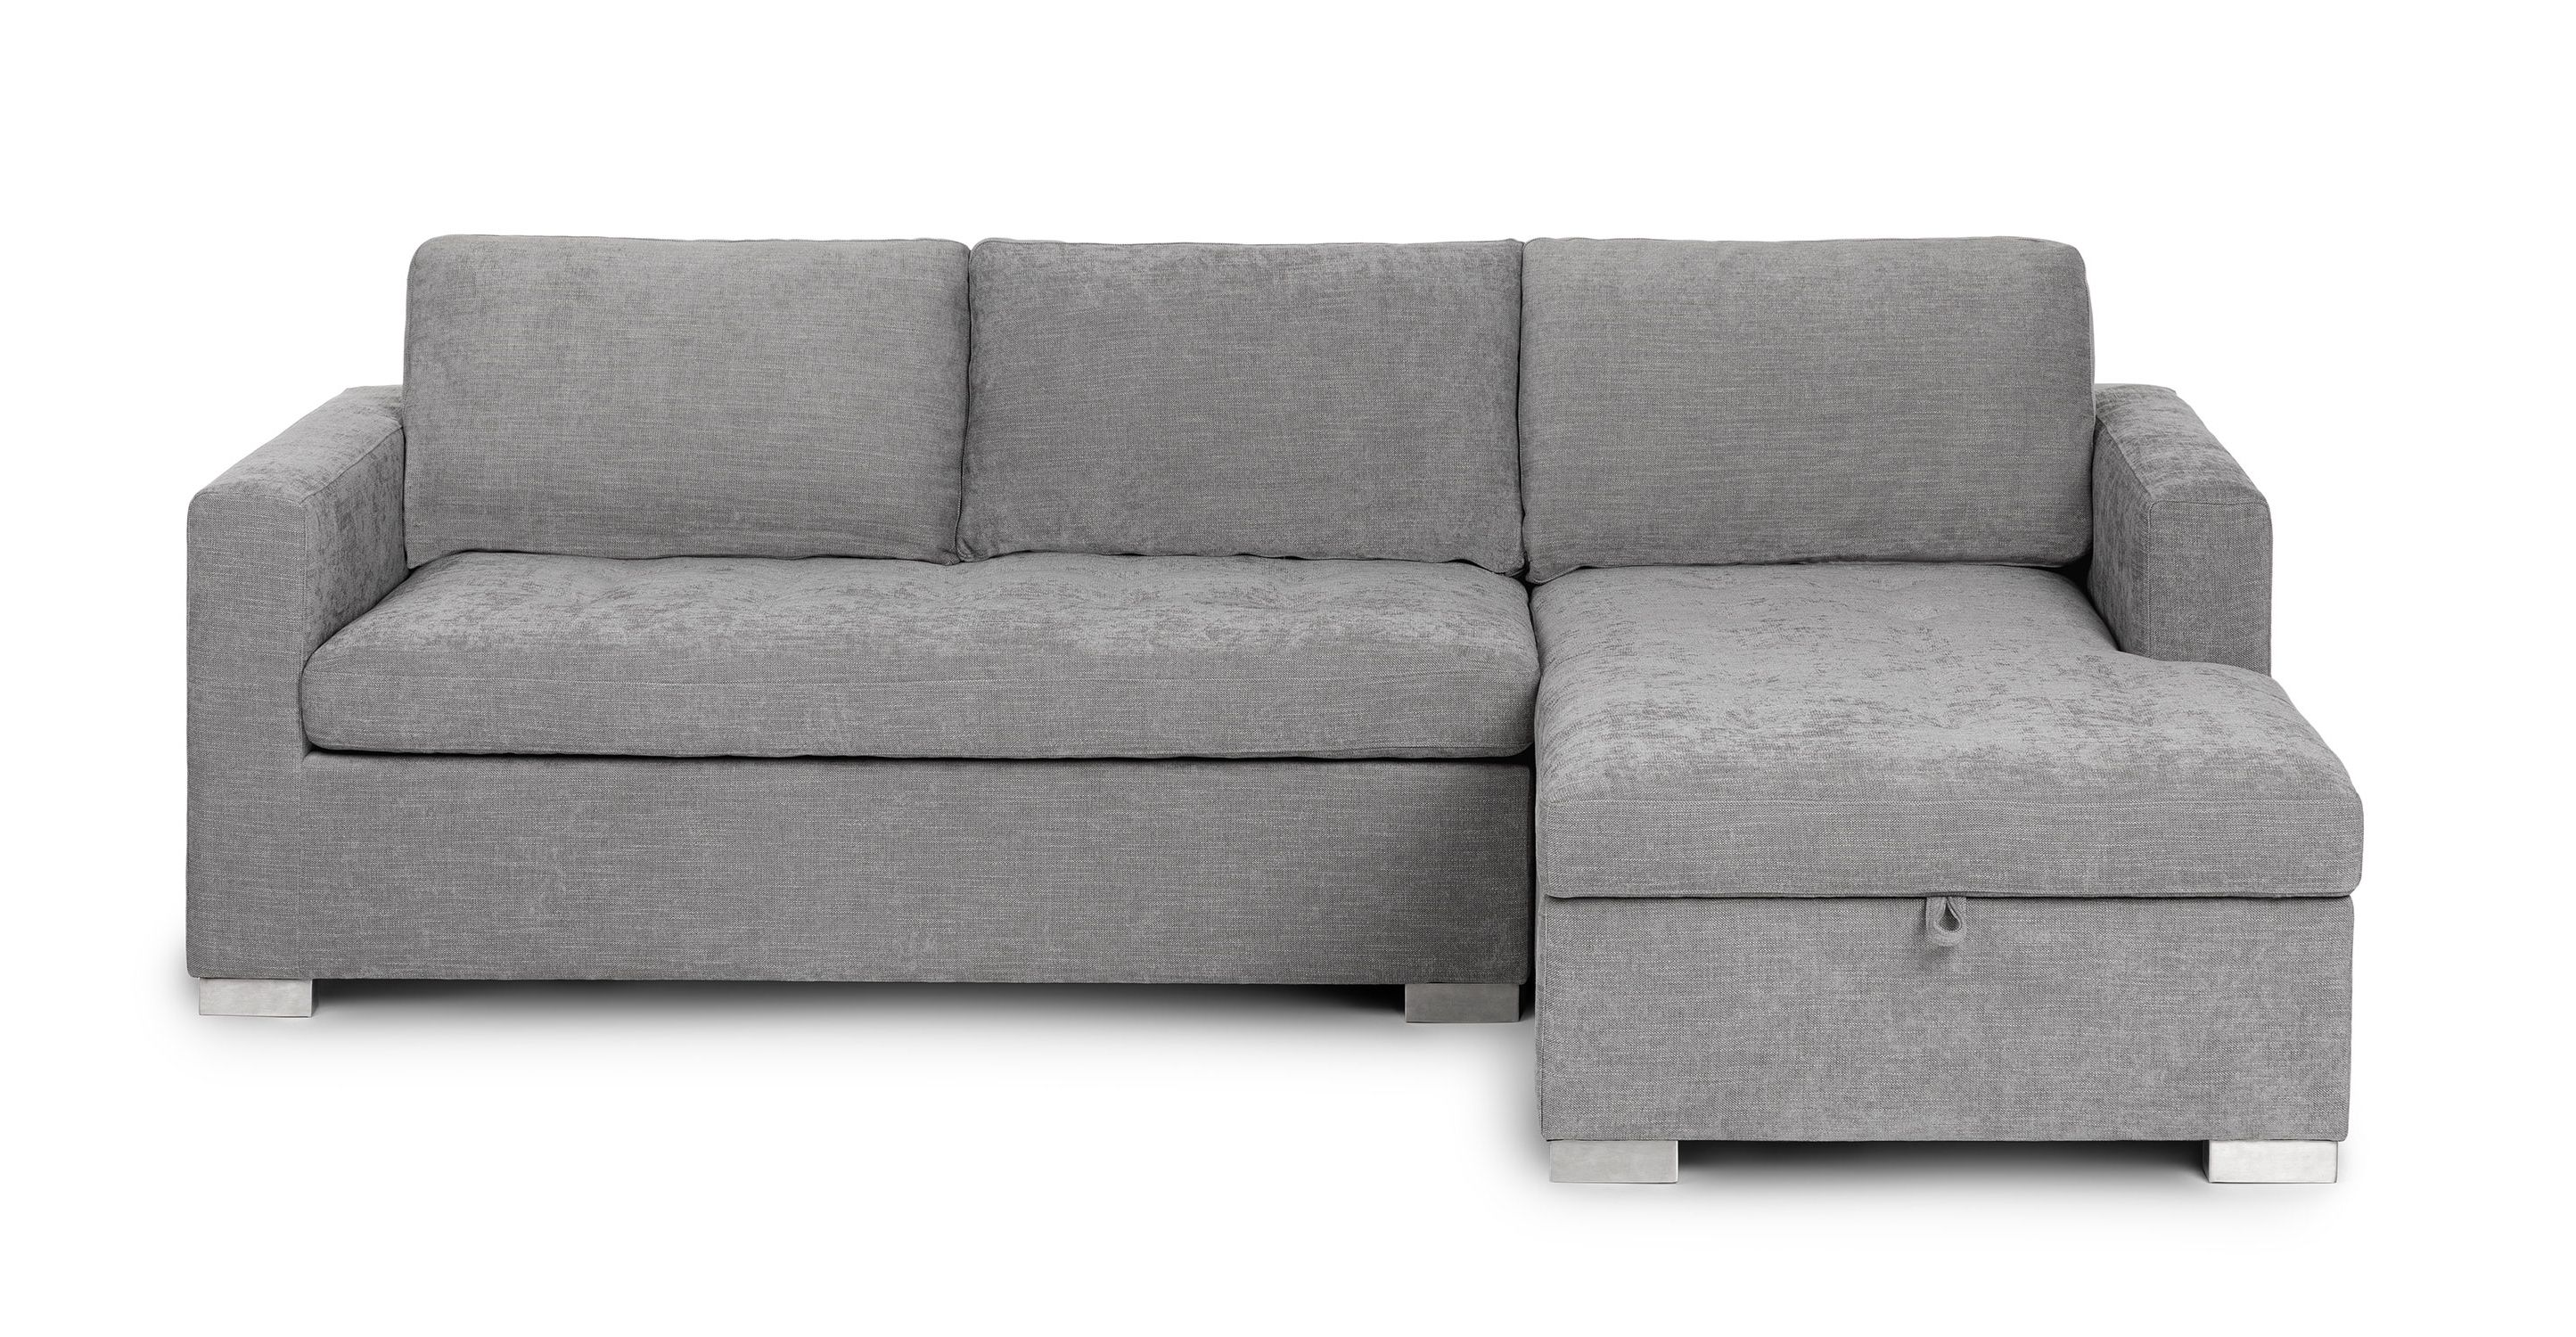 Right Facing Dawn Gray Fabric Sectional Sofa Bed | Soma | Article For Sofa Beds With Right Chaise And Pillows (View 7 of 20)